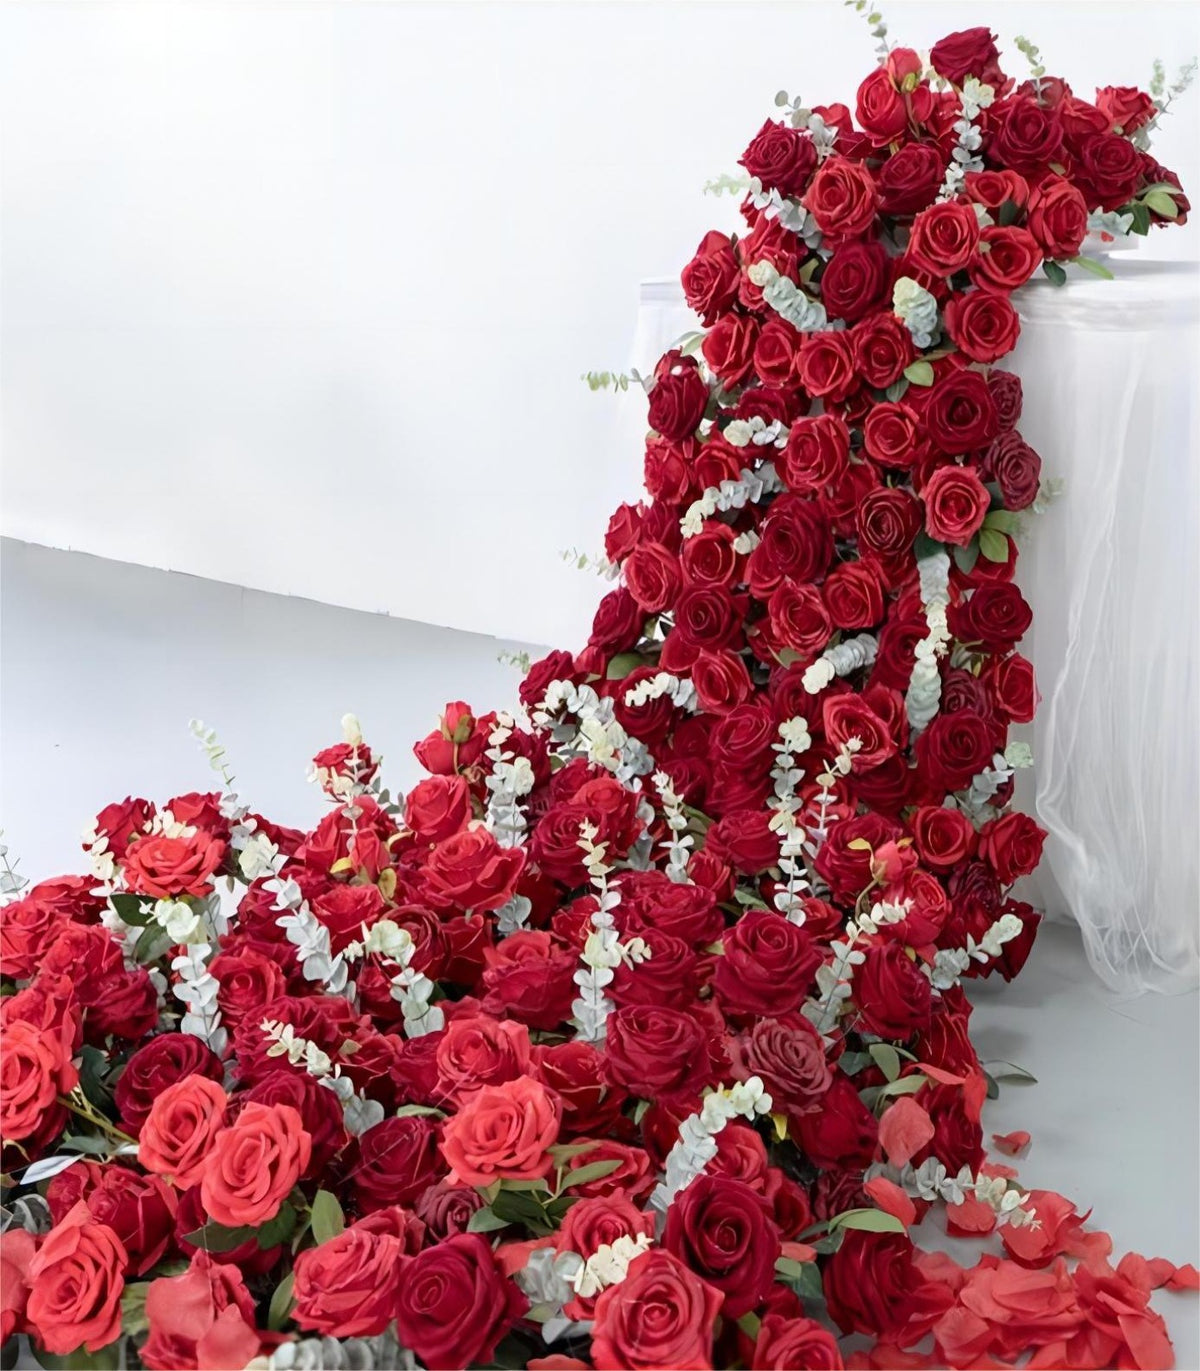 2.5*1.5m Red Artificial Flower Rose Wedding Party Birthday Backdrop Decor CH9314-39